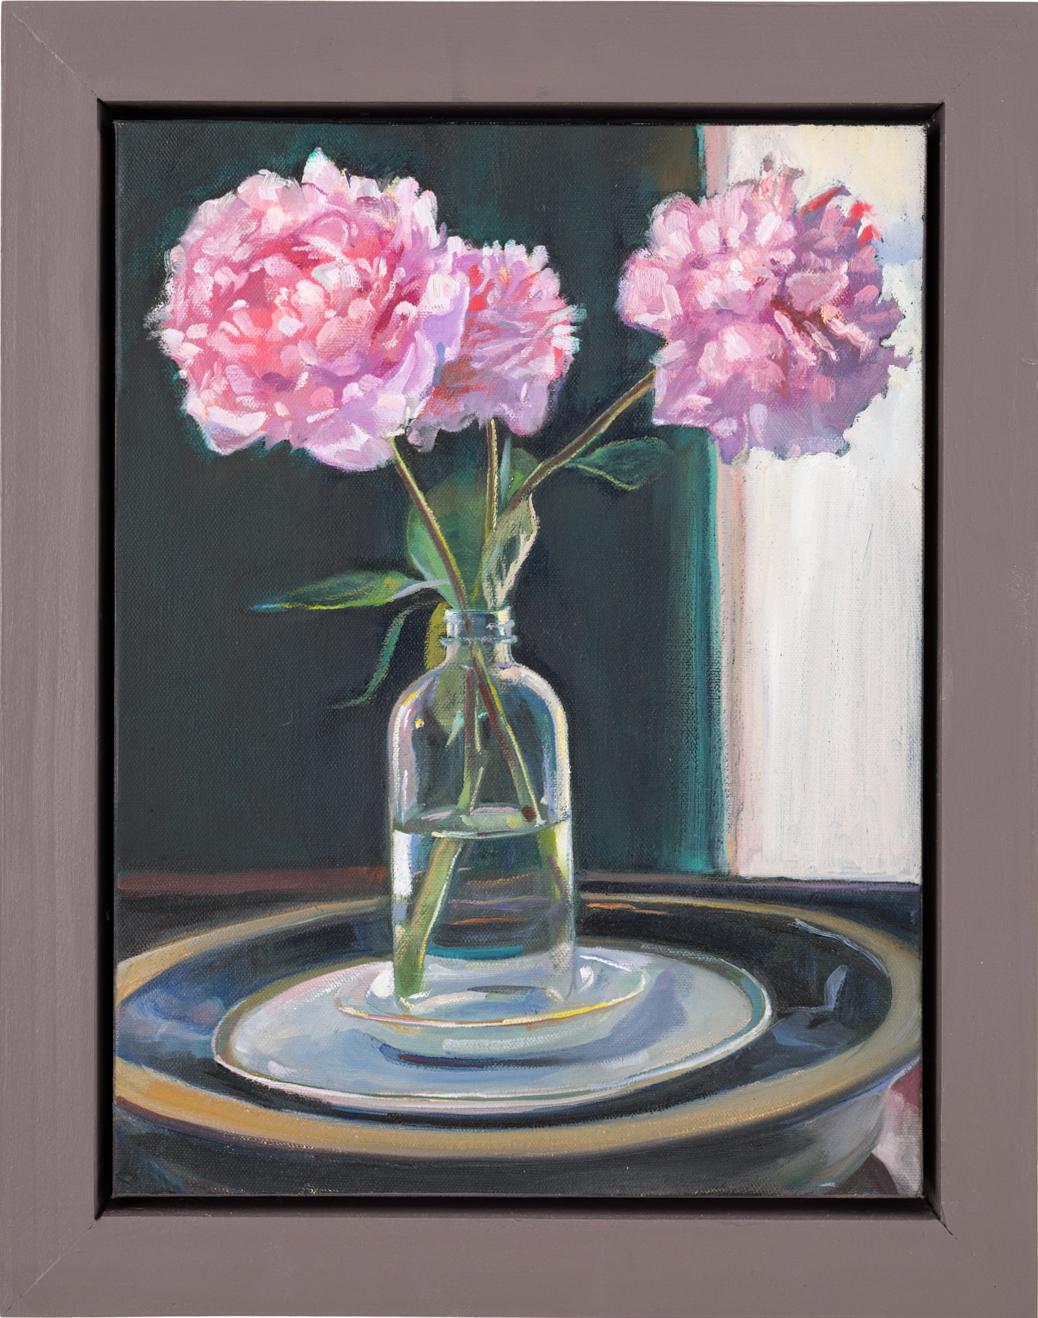 Carl Grauer Interior Painting - Peony (Still Life Painting of a Pink Flower in an Interior Setting, Framed)